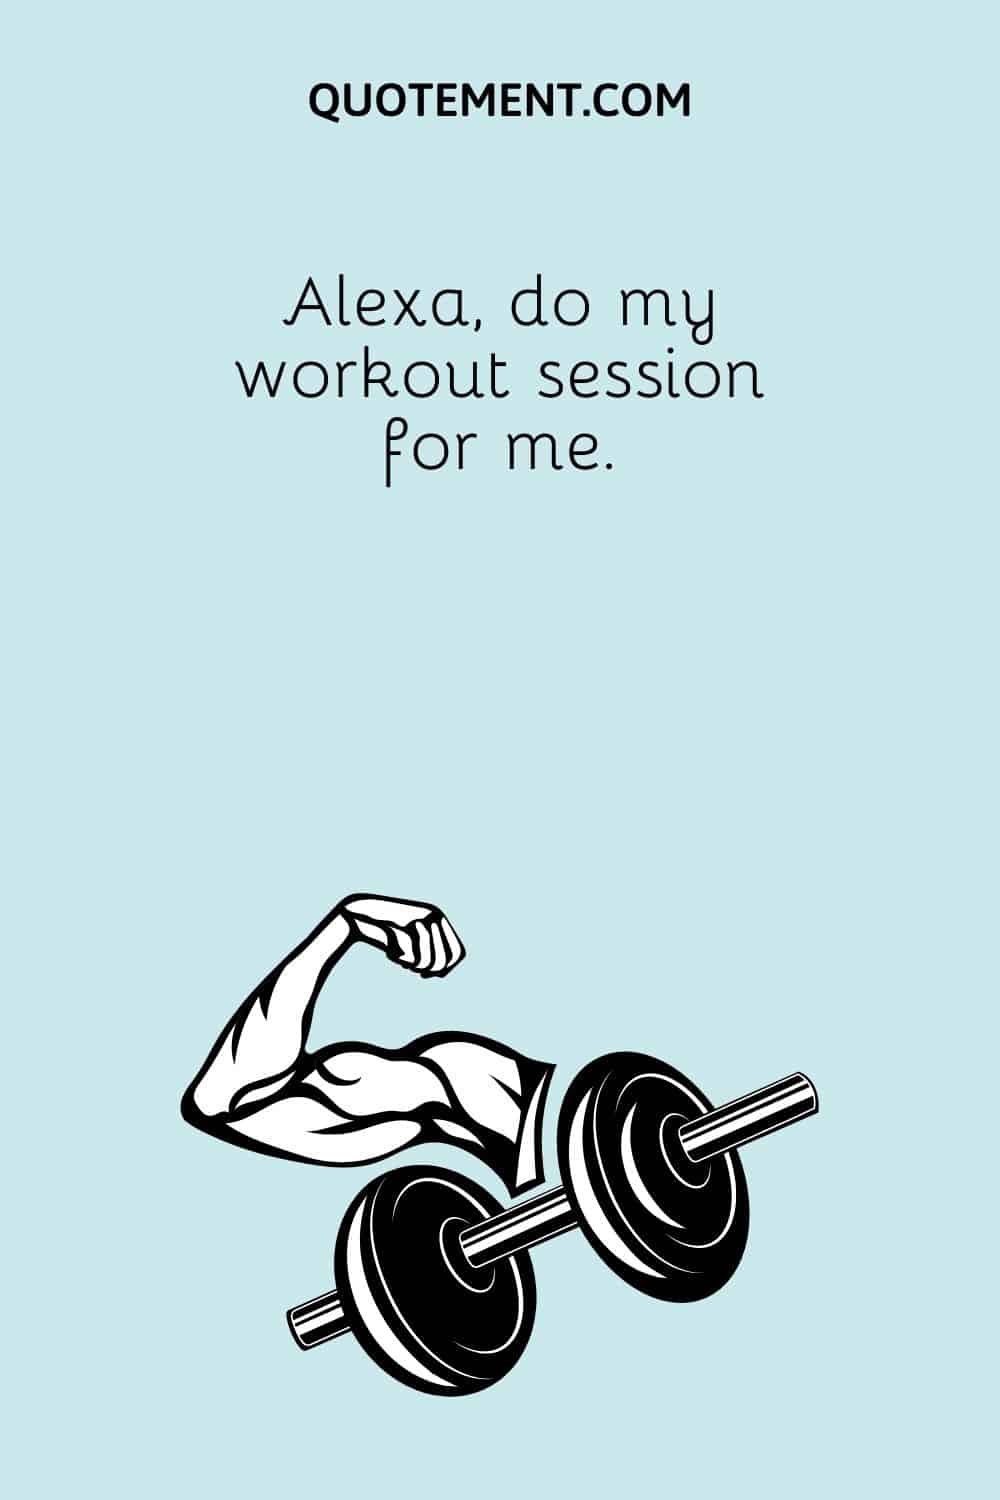 Alexa, do my workout session for me.